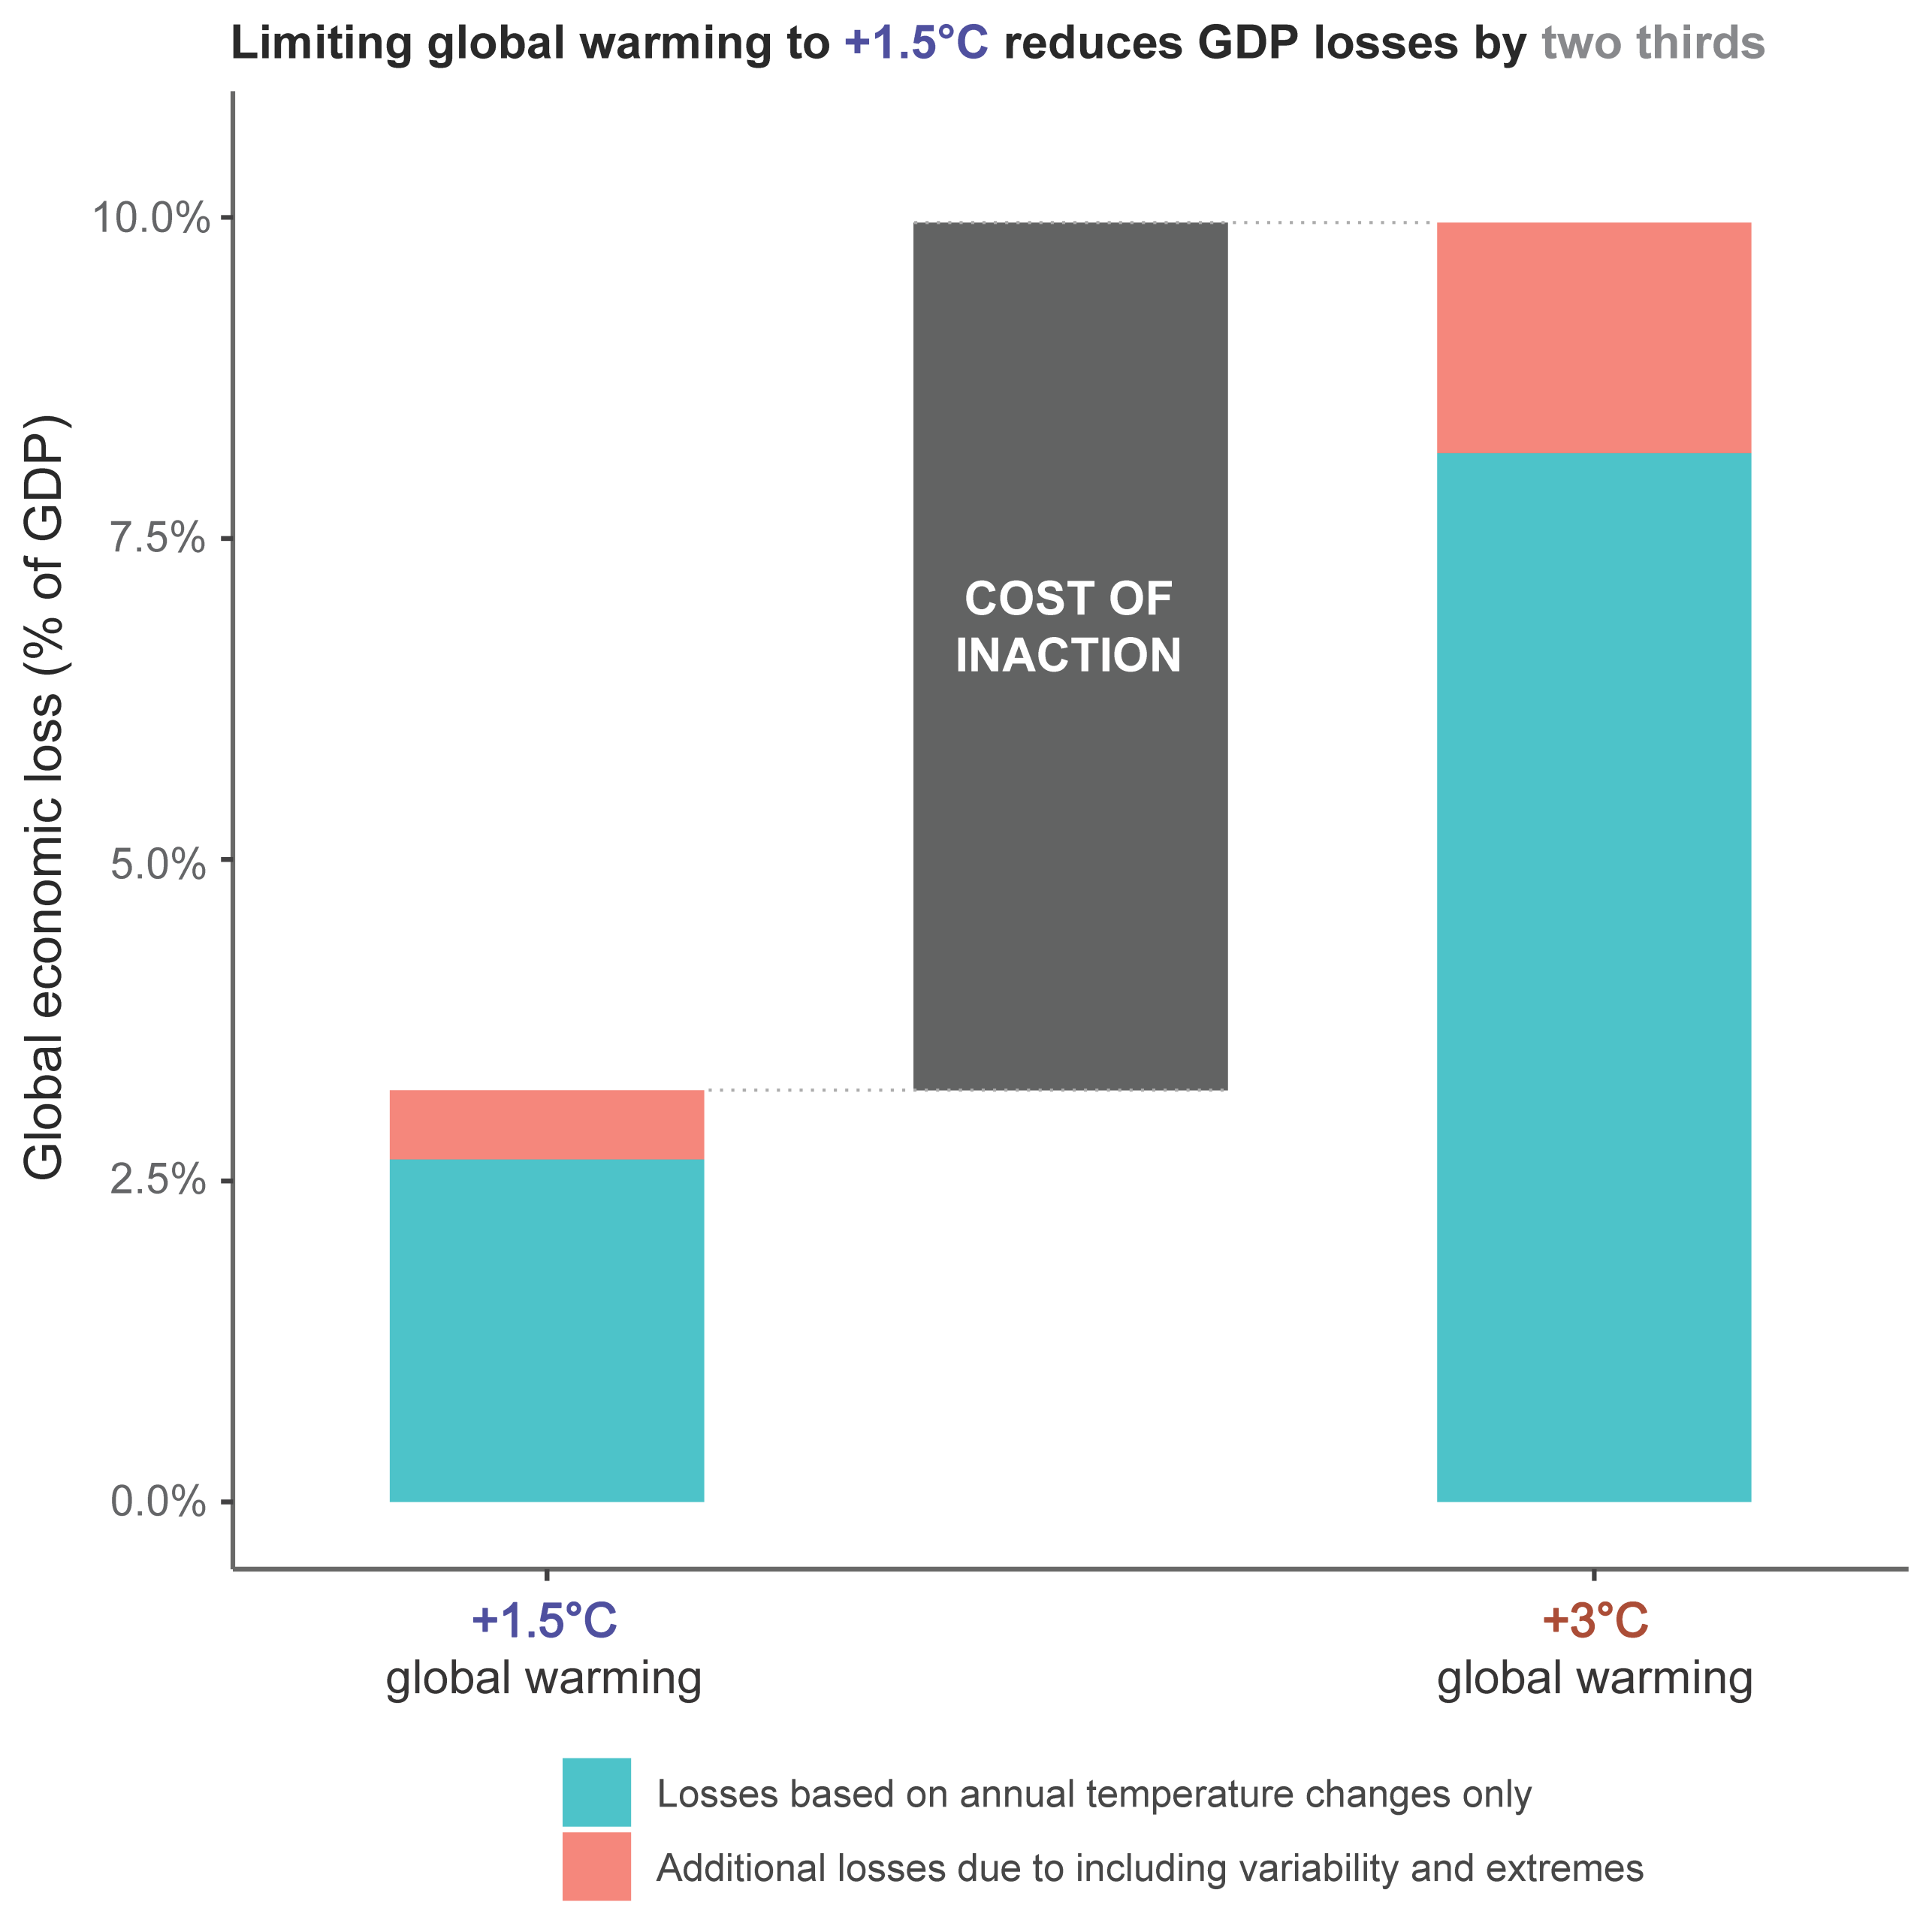 This chart shows a nearly 7% difference between global GDP loss when global warming rises 1.5 degrees and 3 degrees Celsius or more.